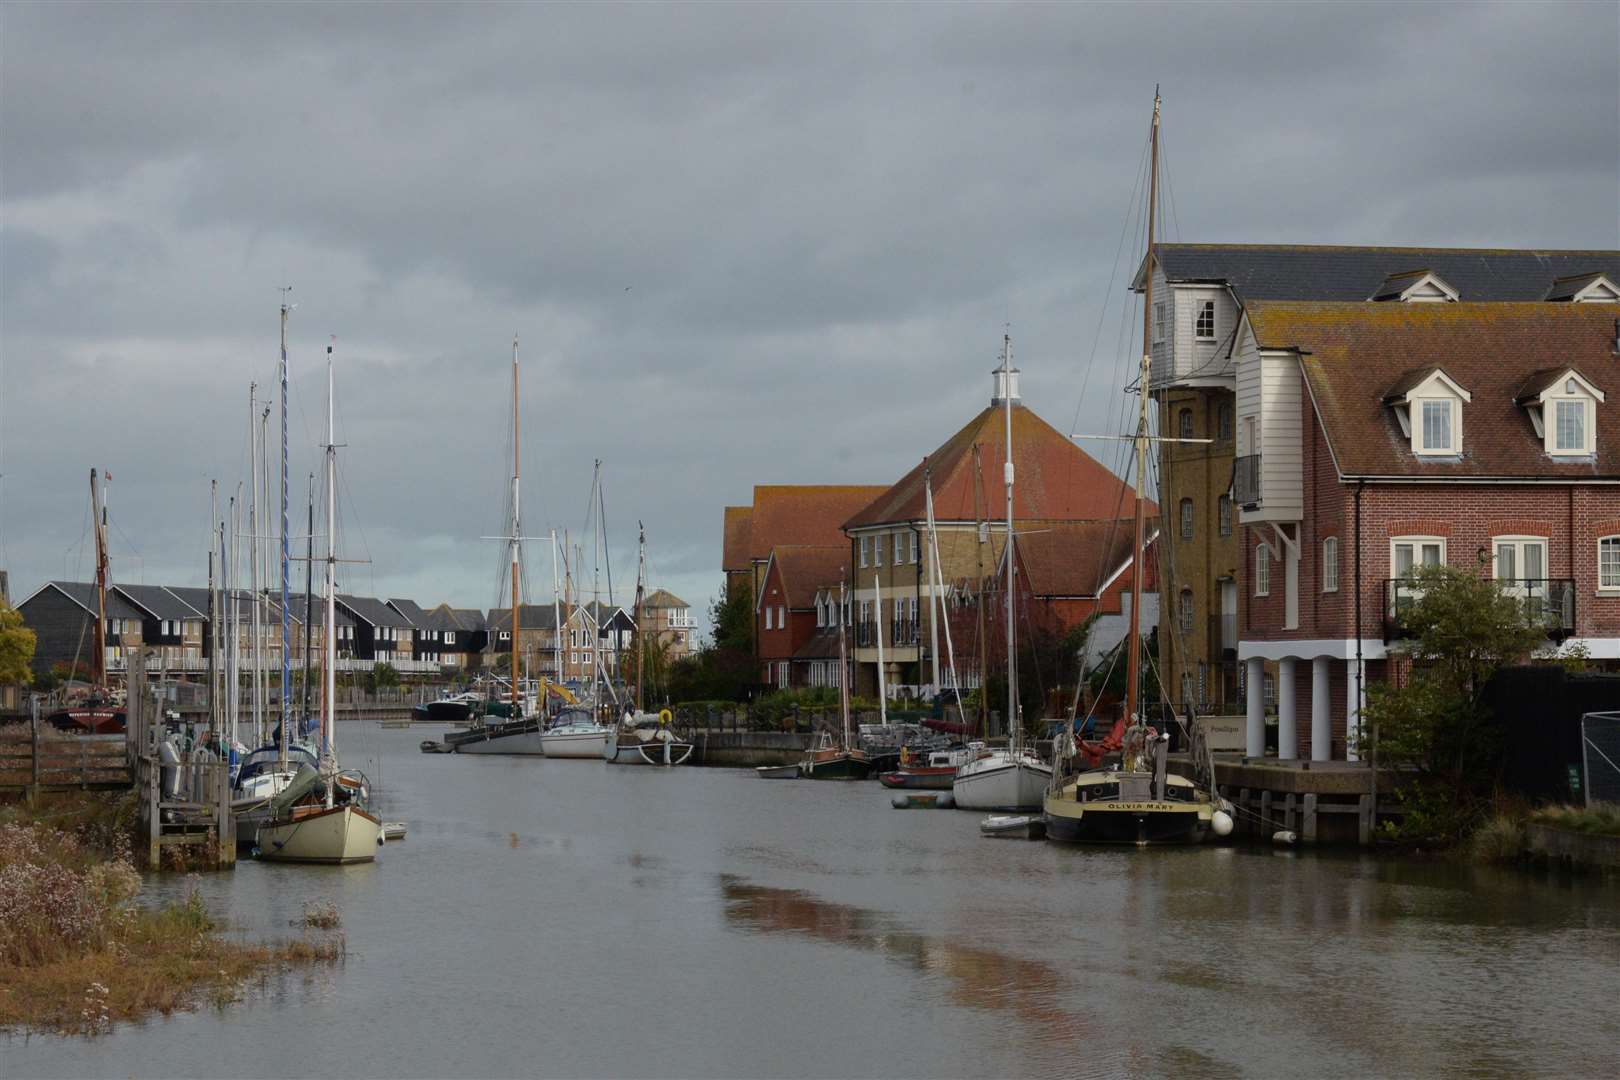 Faversham Creek is a far cry from the turquoise waters of the Caribbean